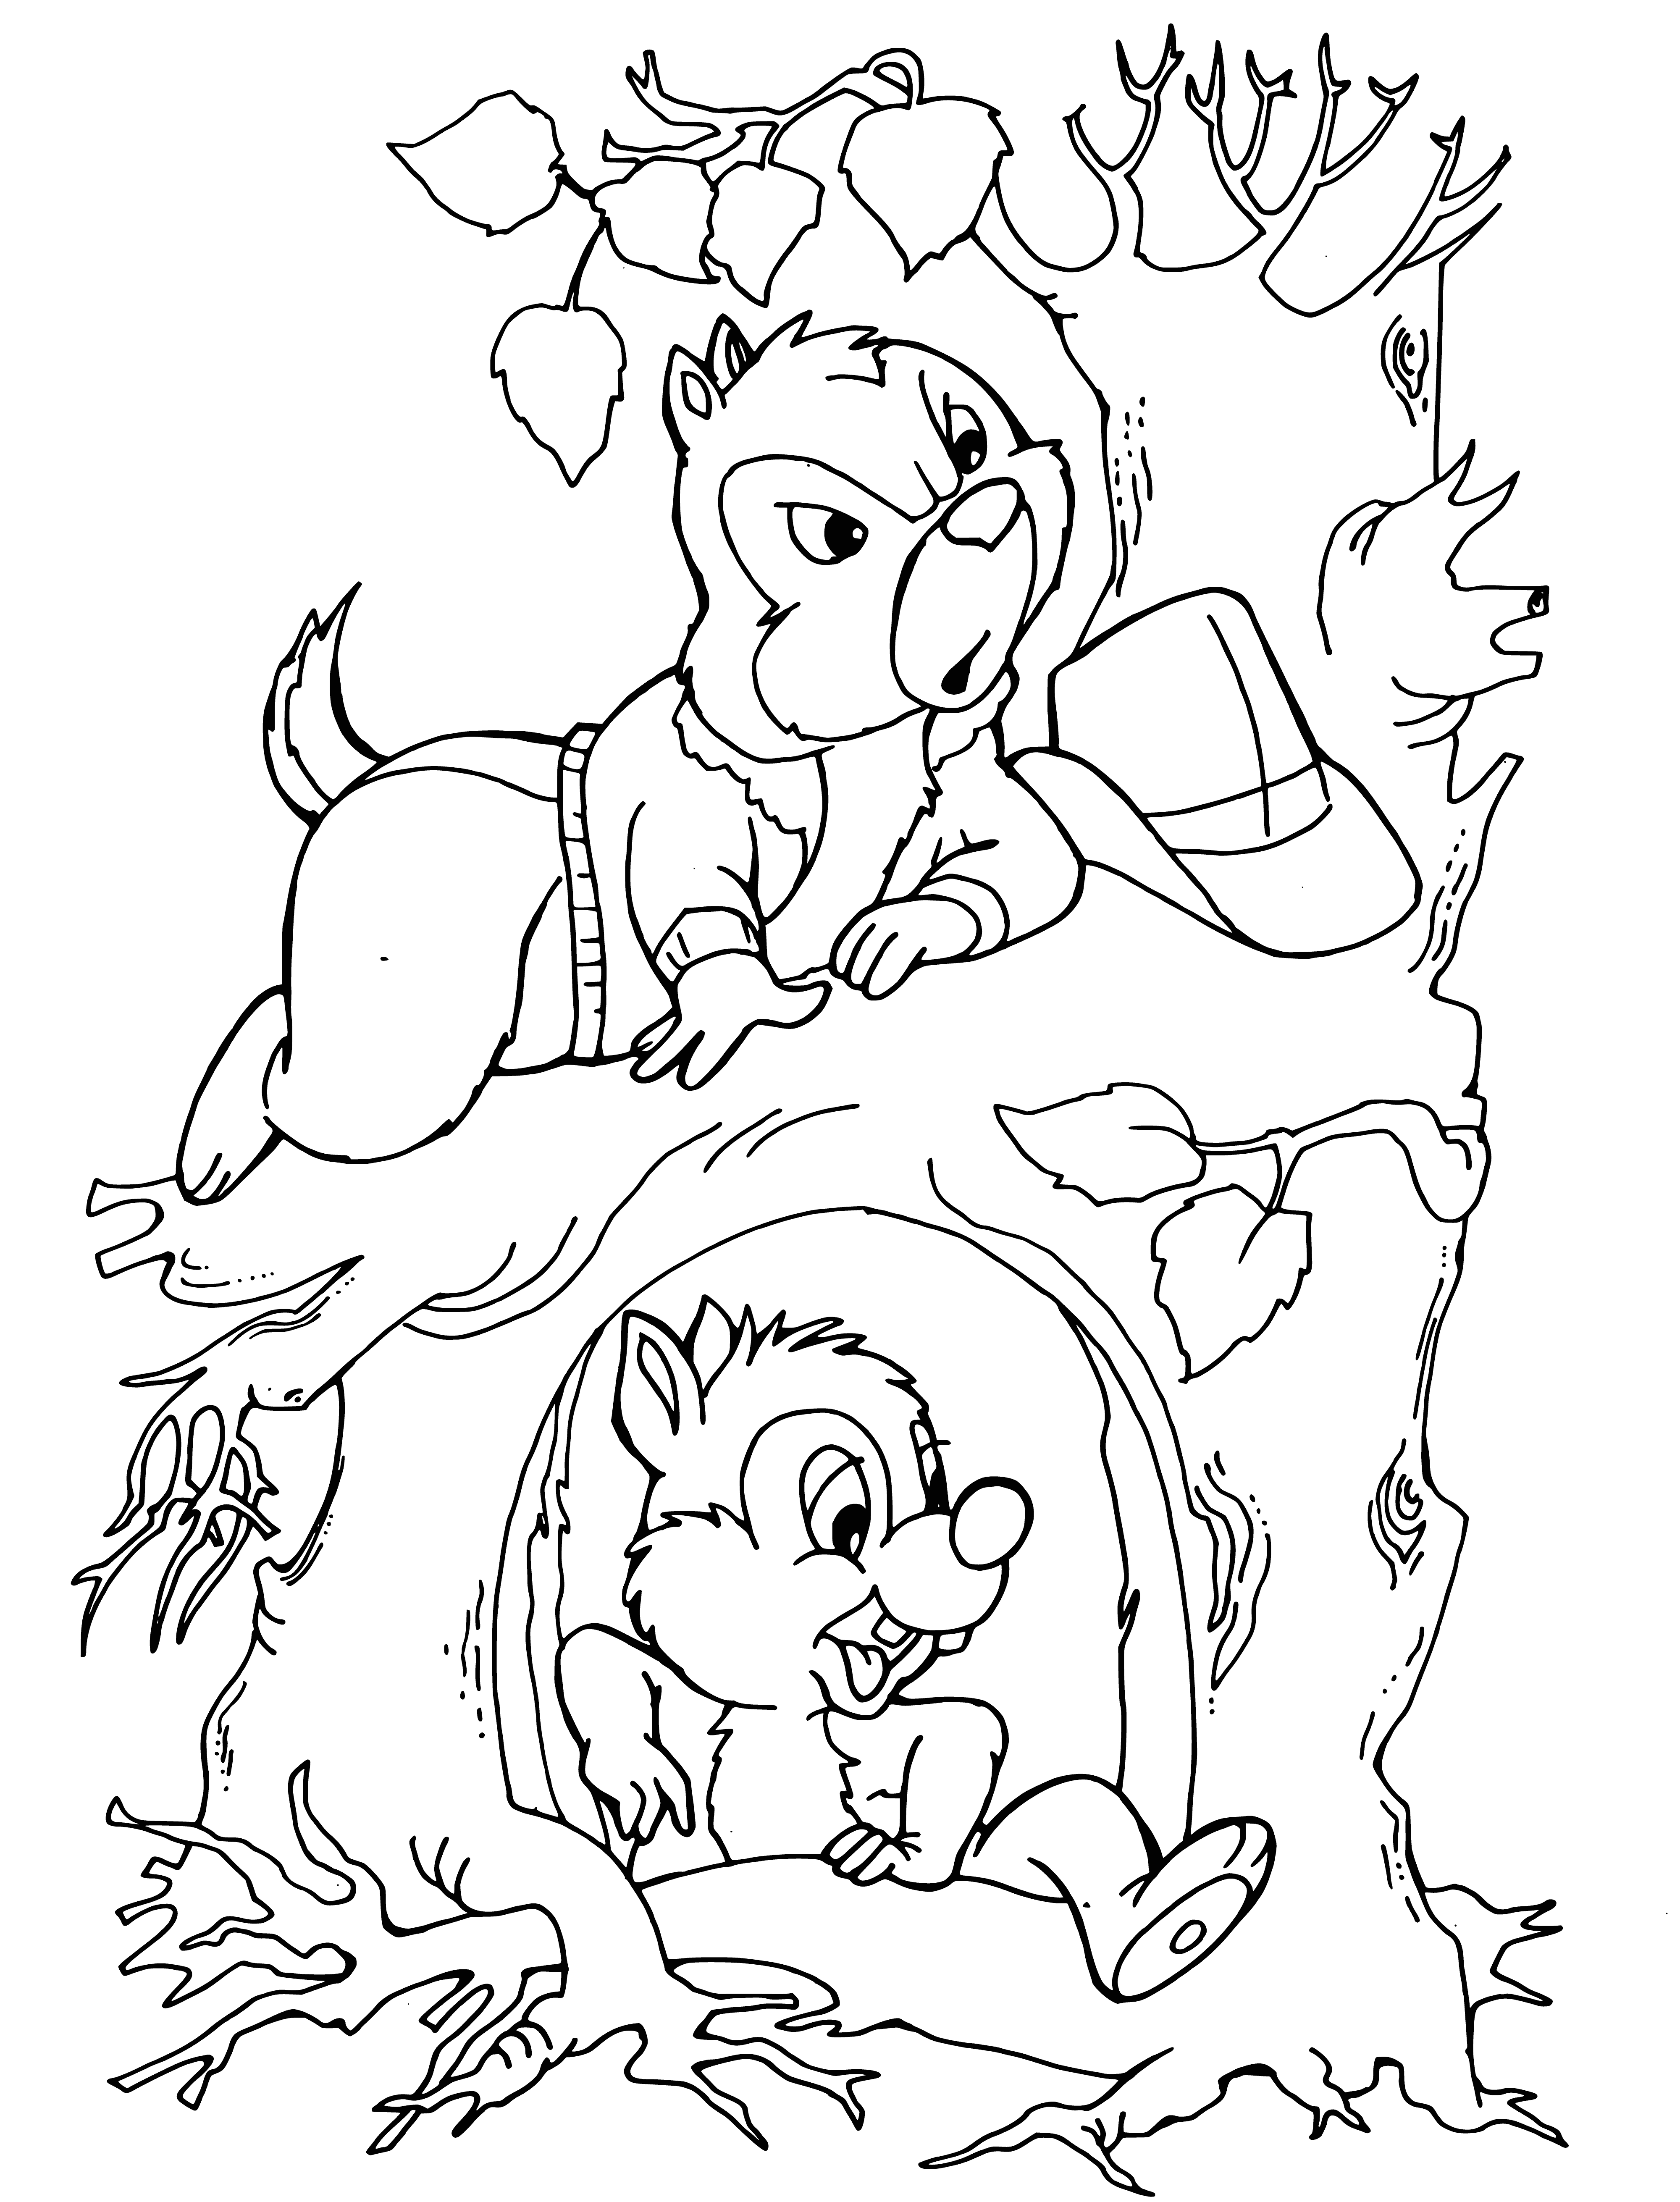 Dale and Chip coloring page